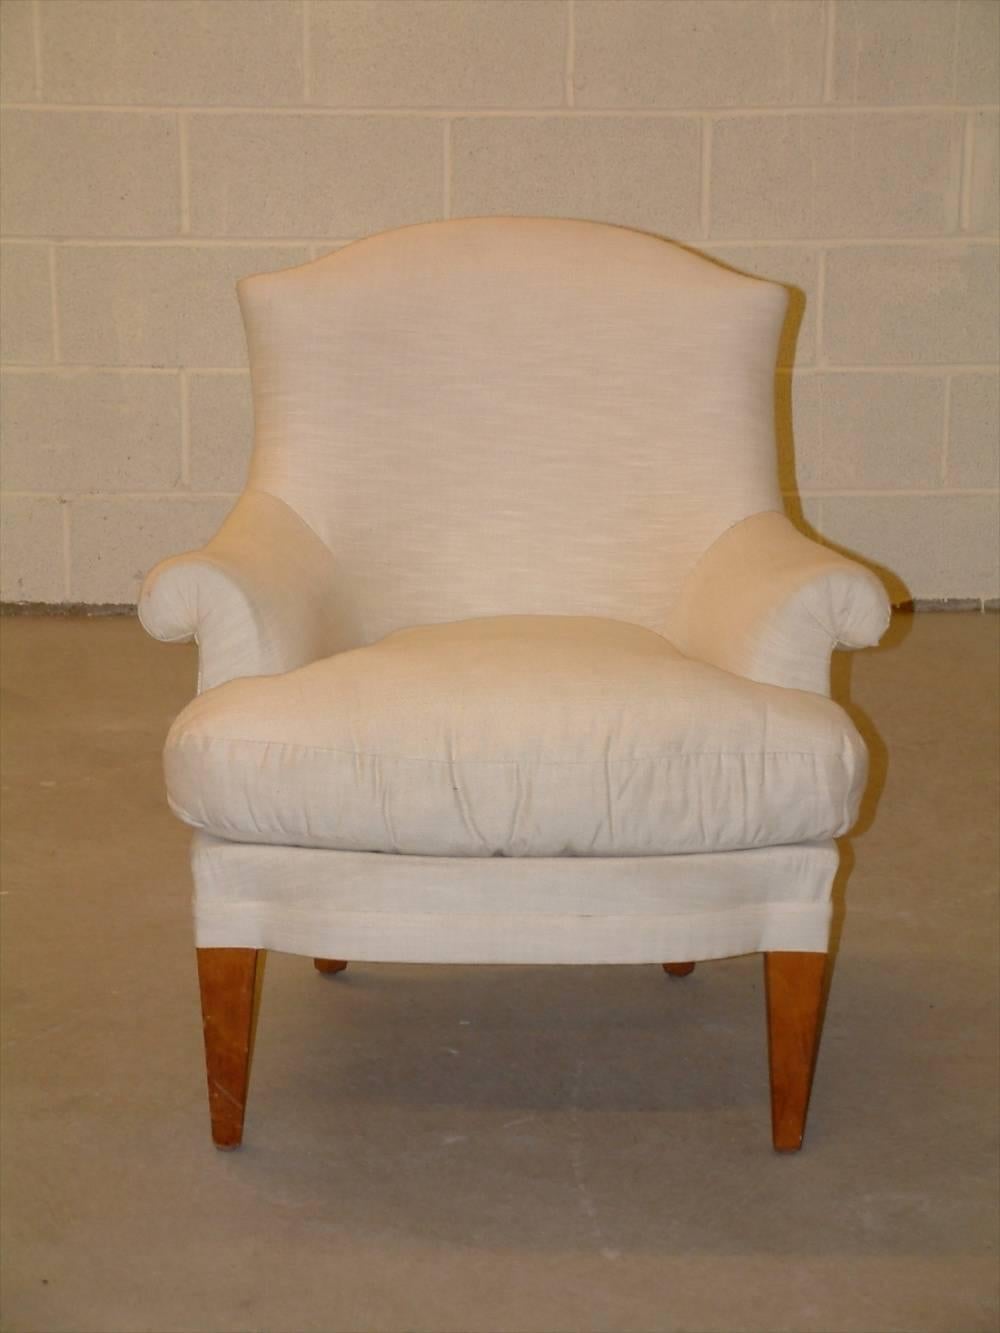 French Art Deco club chairs, currently in muslin, French, circa 1935. Three available. Signed. Please see detail photos.

Please note these chairs are in the original muslin, as produced. They require outer fabric and minimal restoration.